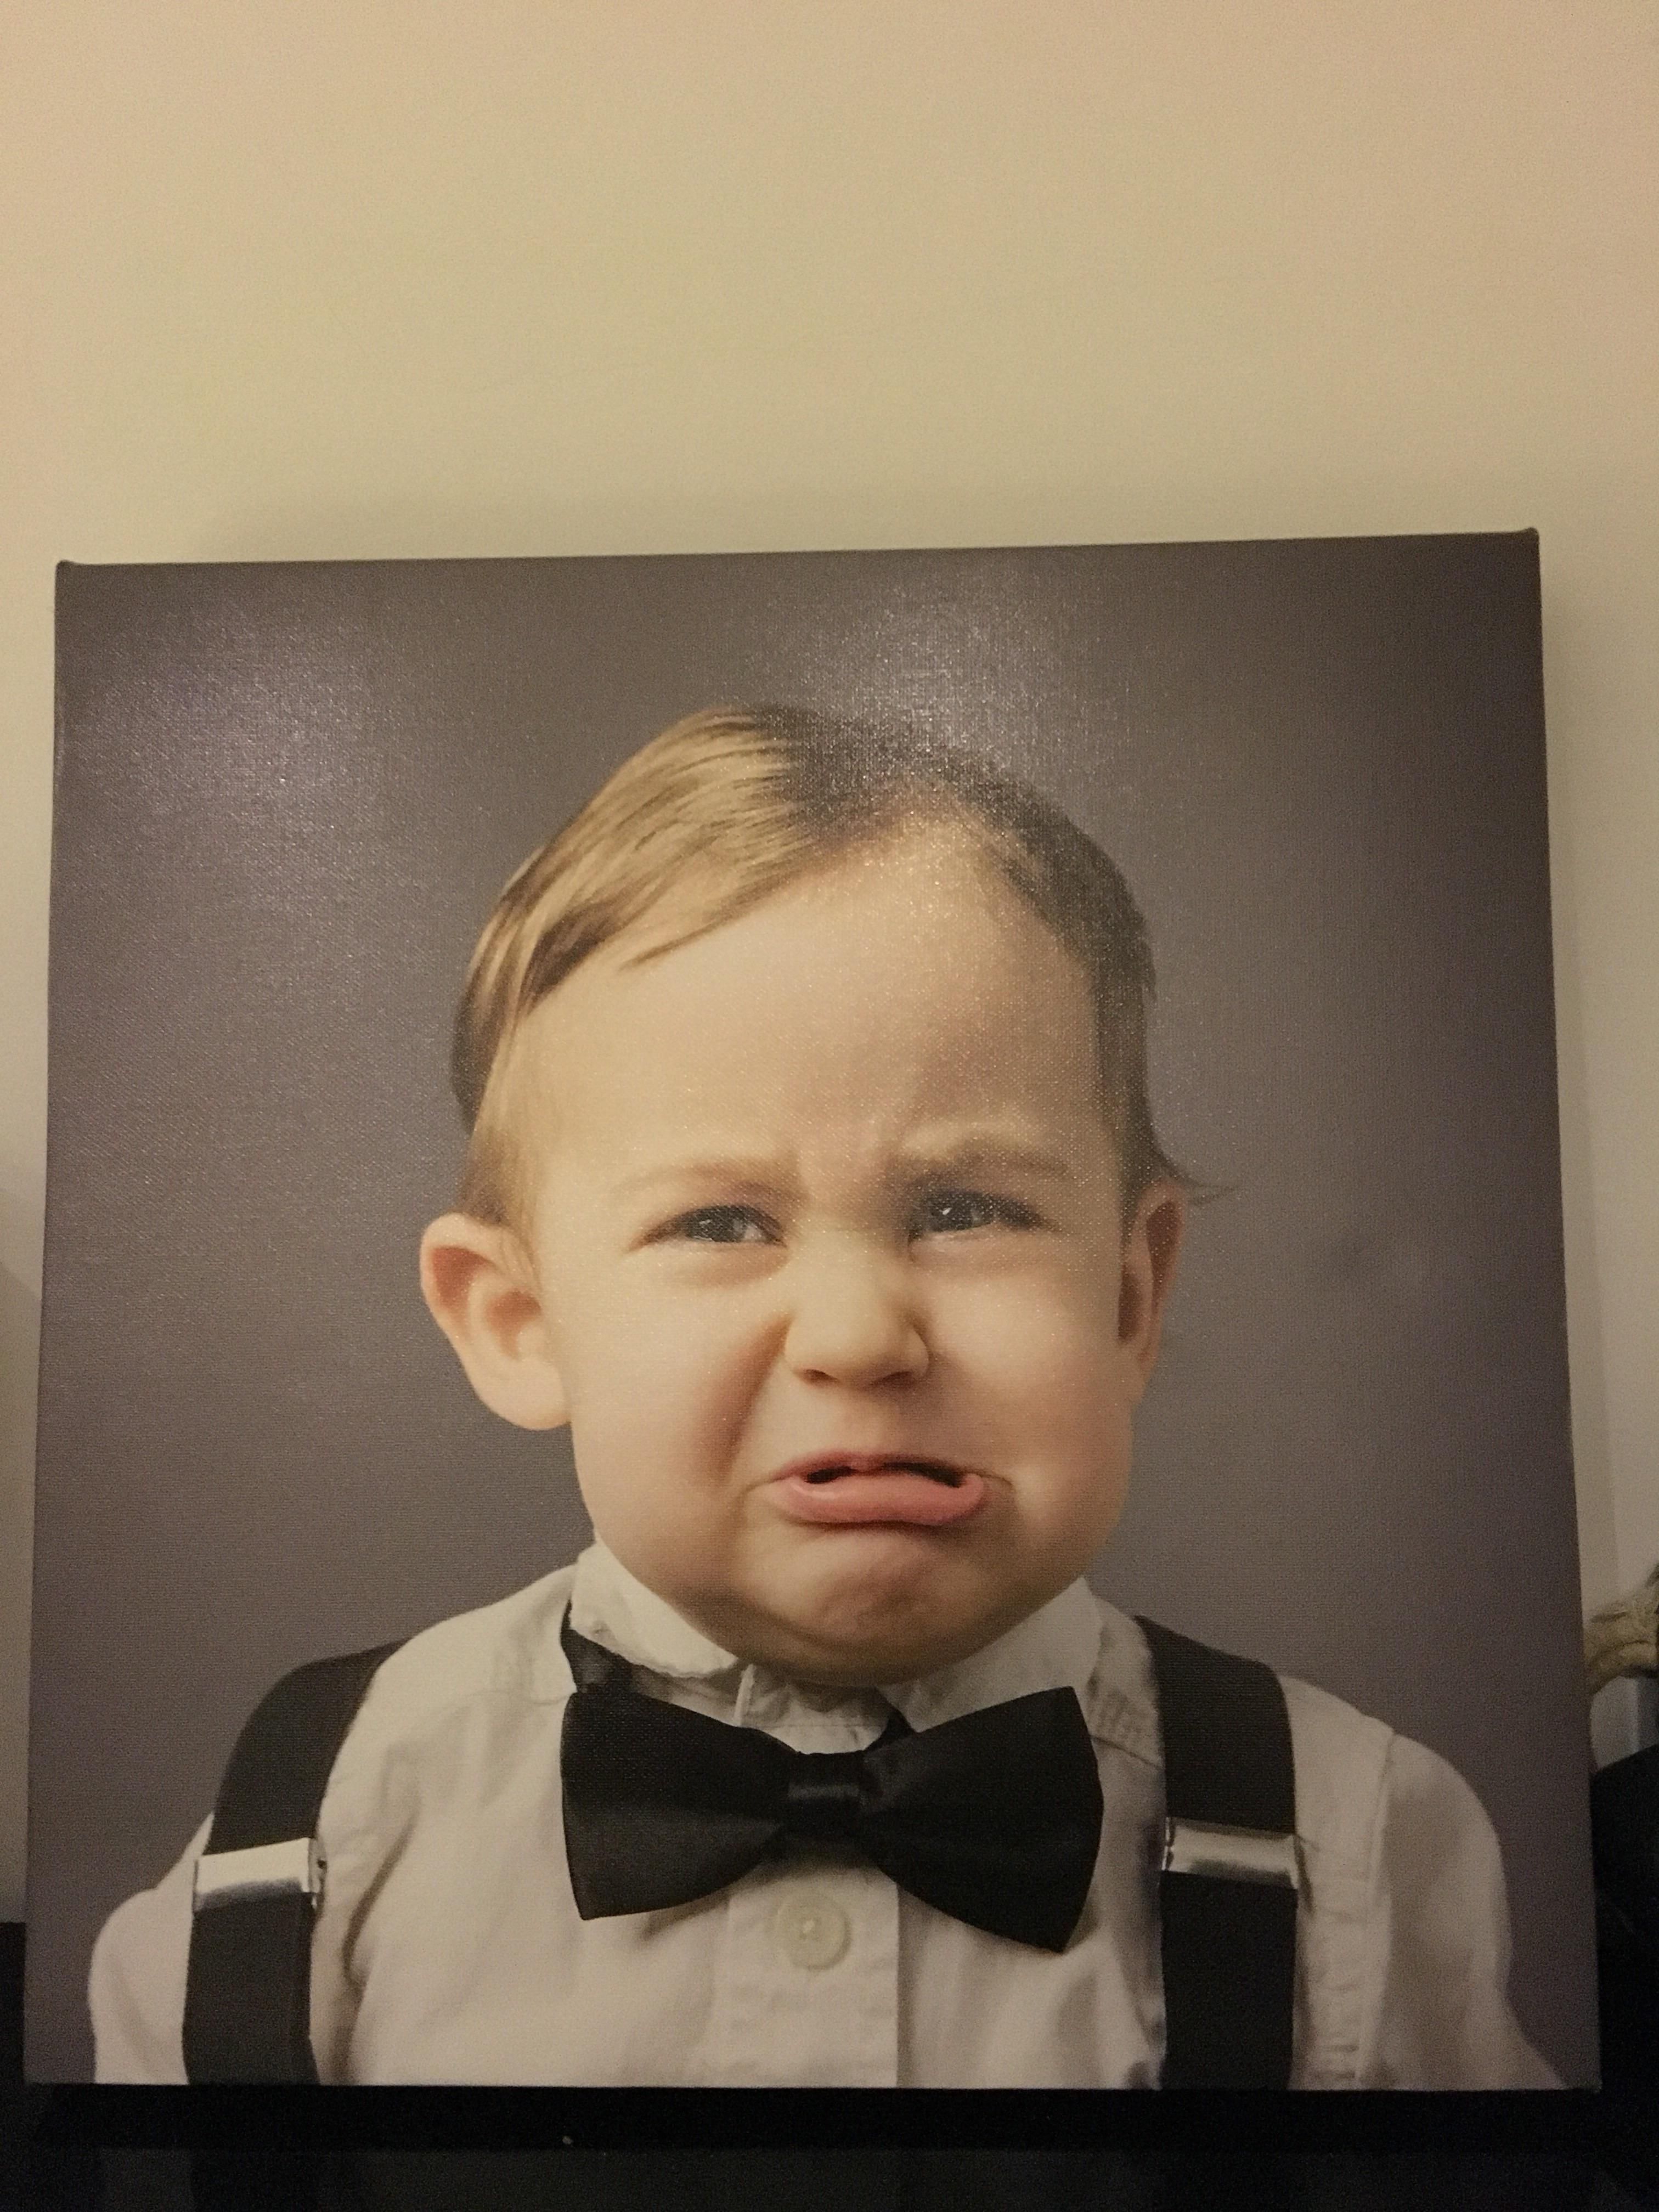 New portrait of my son for the living room.